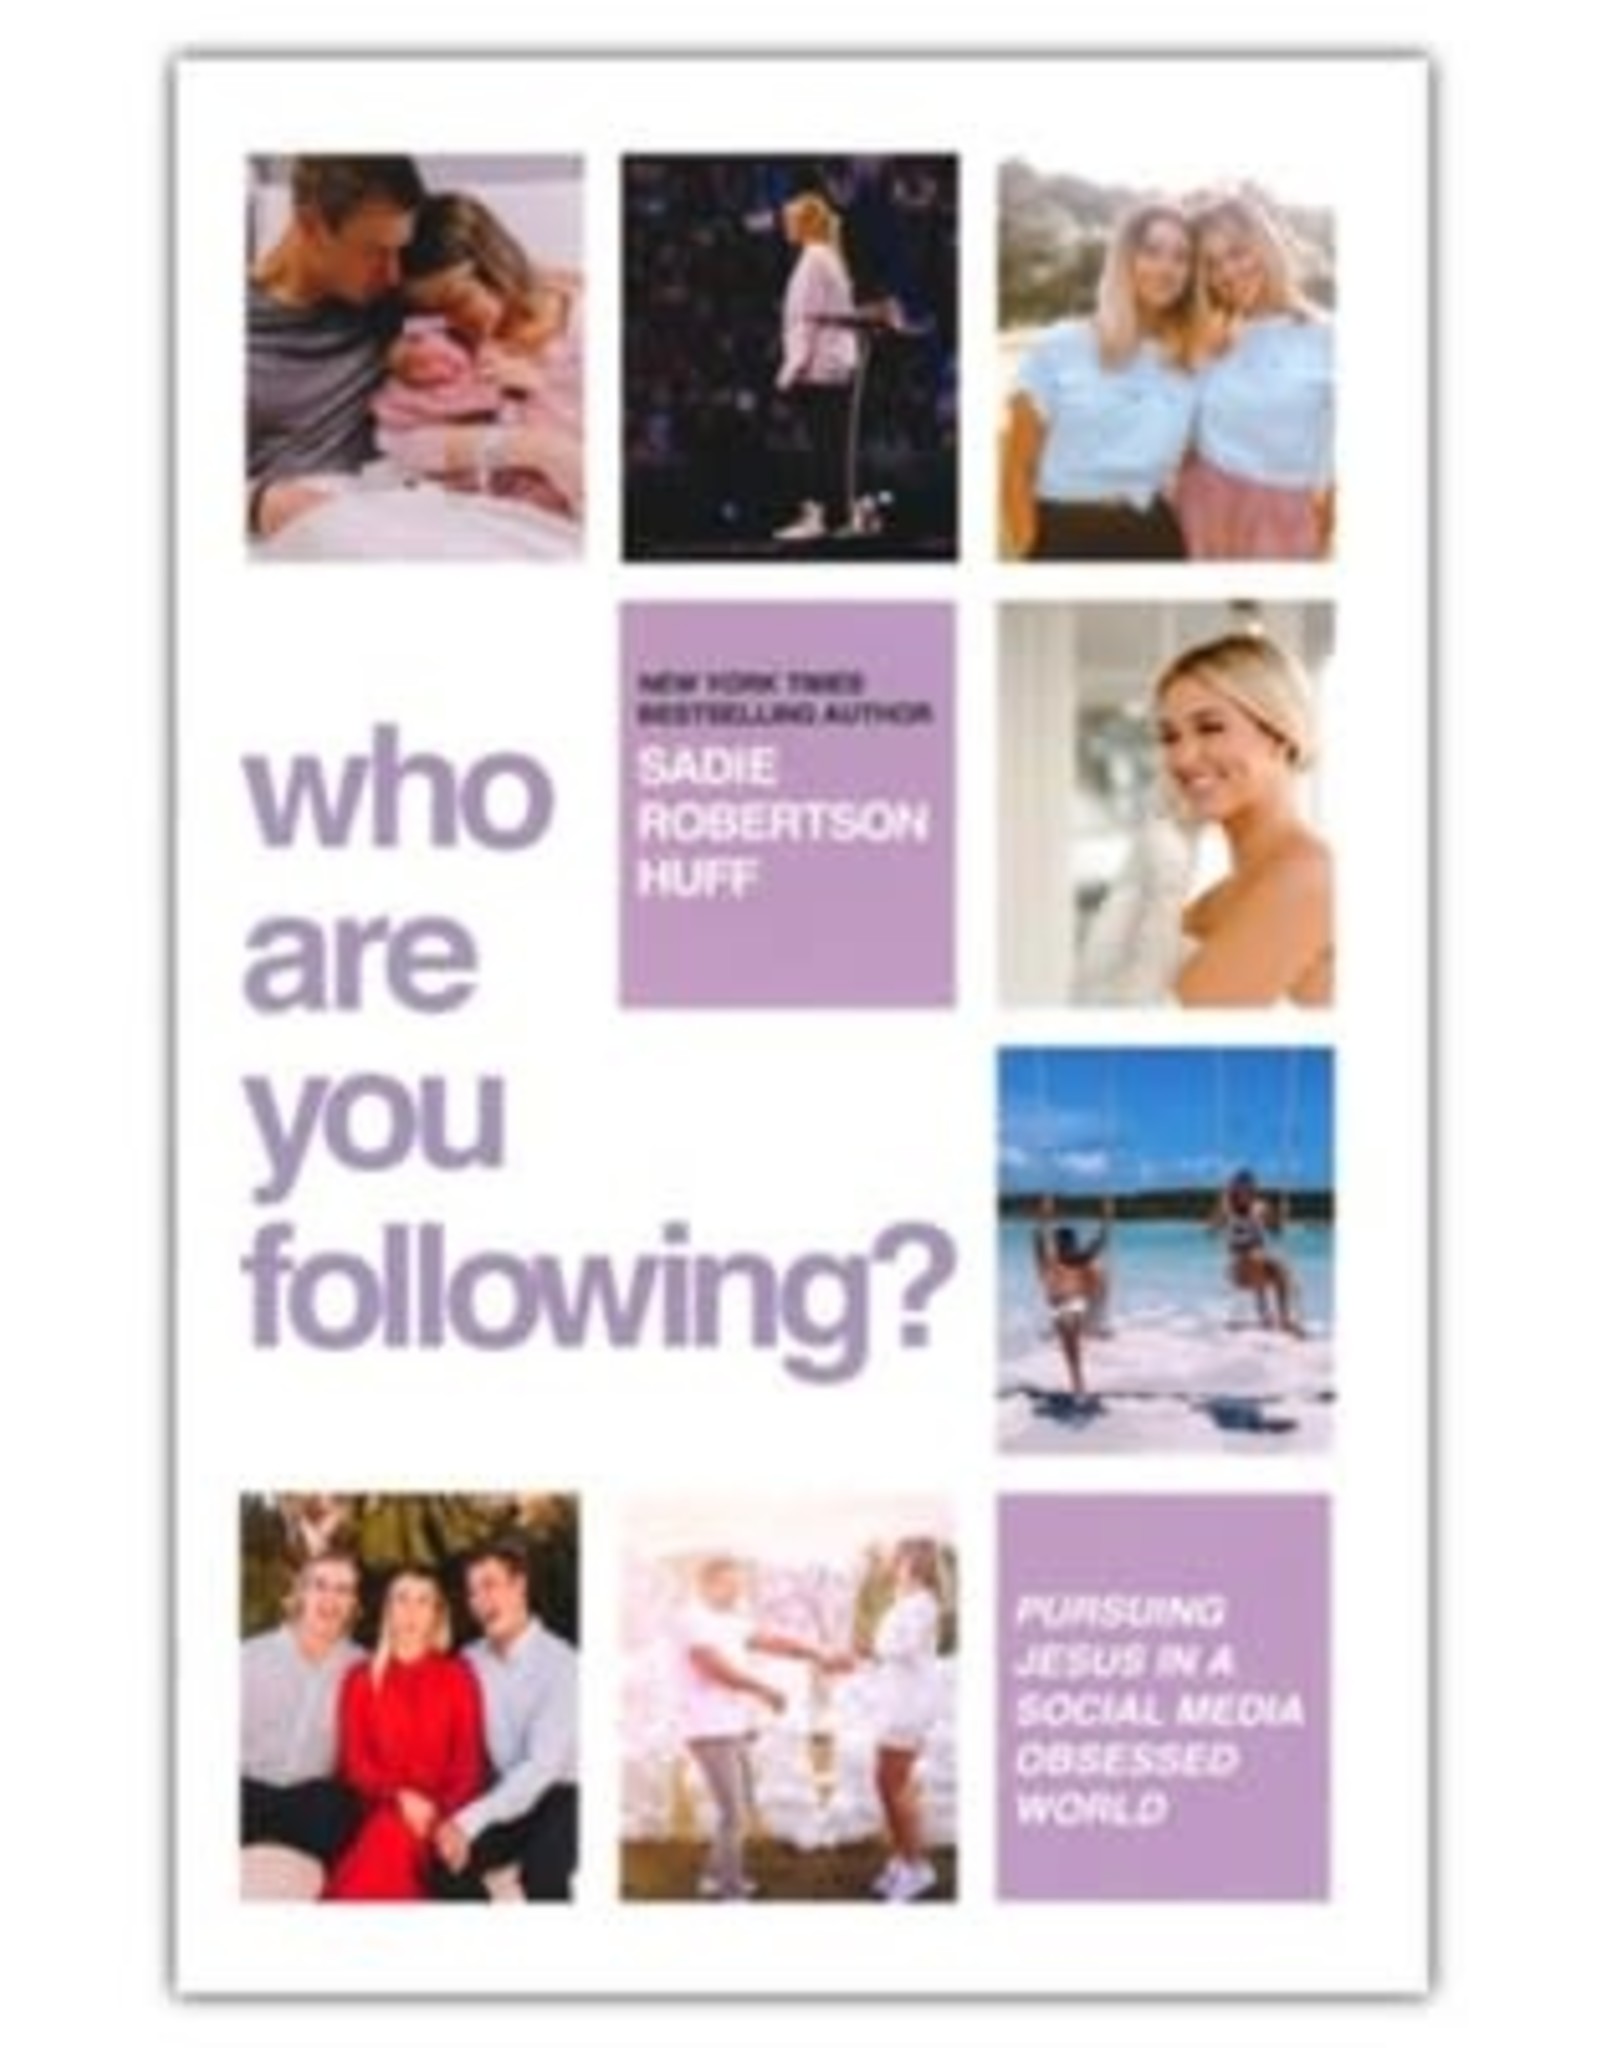 Who Are You Following? By Sadie Robertson Huff